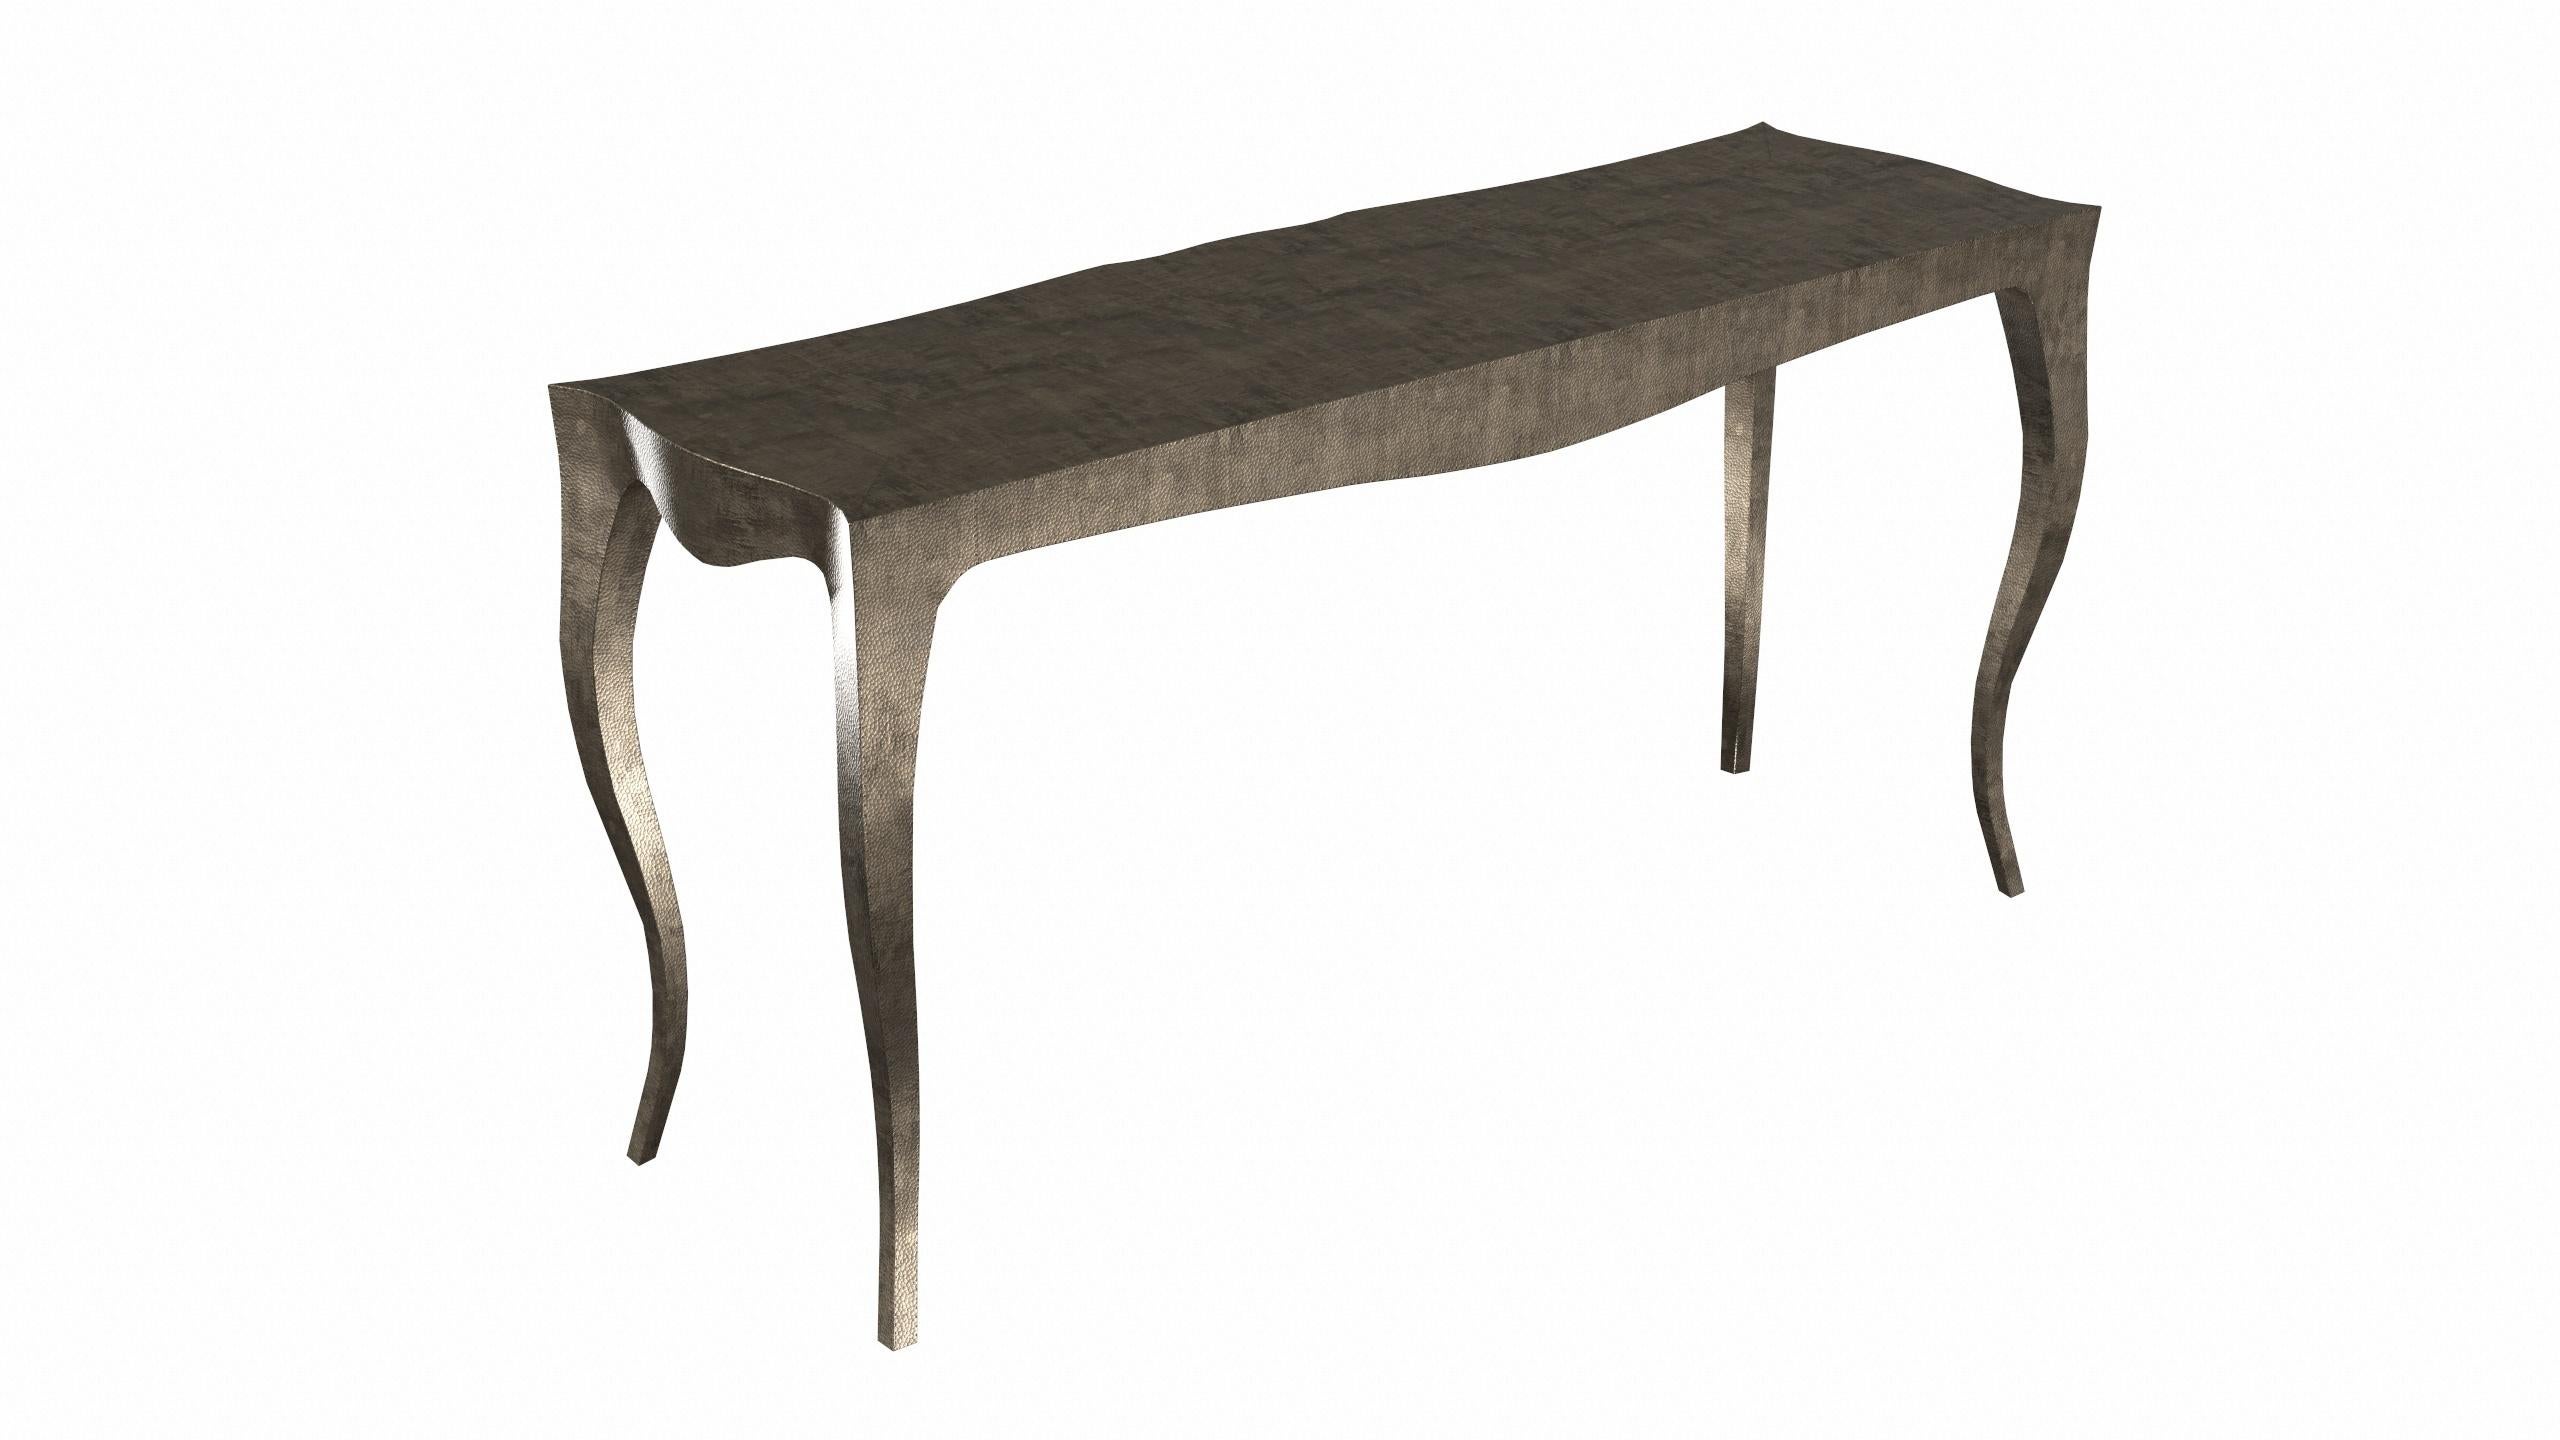 Metal Louise Console Art Deco Nesting and Stacking Tables Mid. Hammered Antique Bronze For Sale